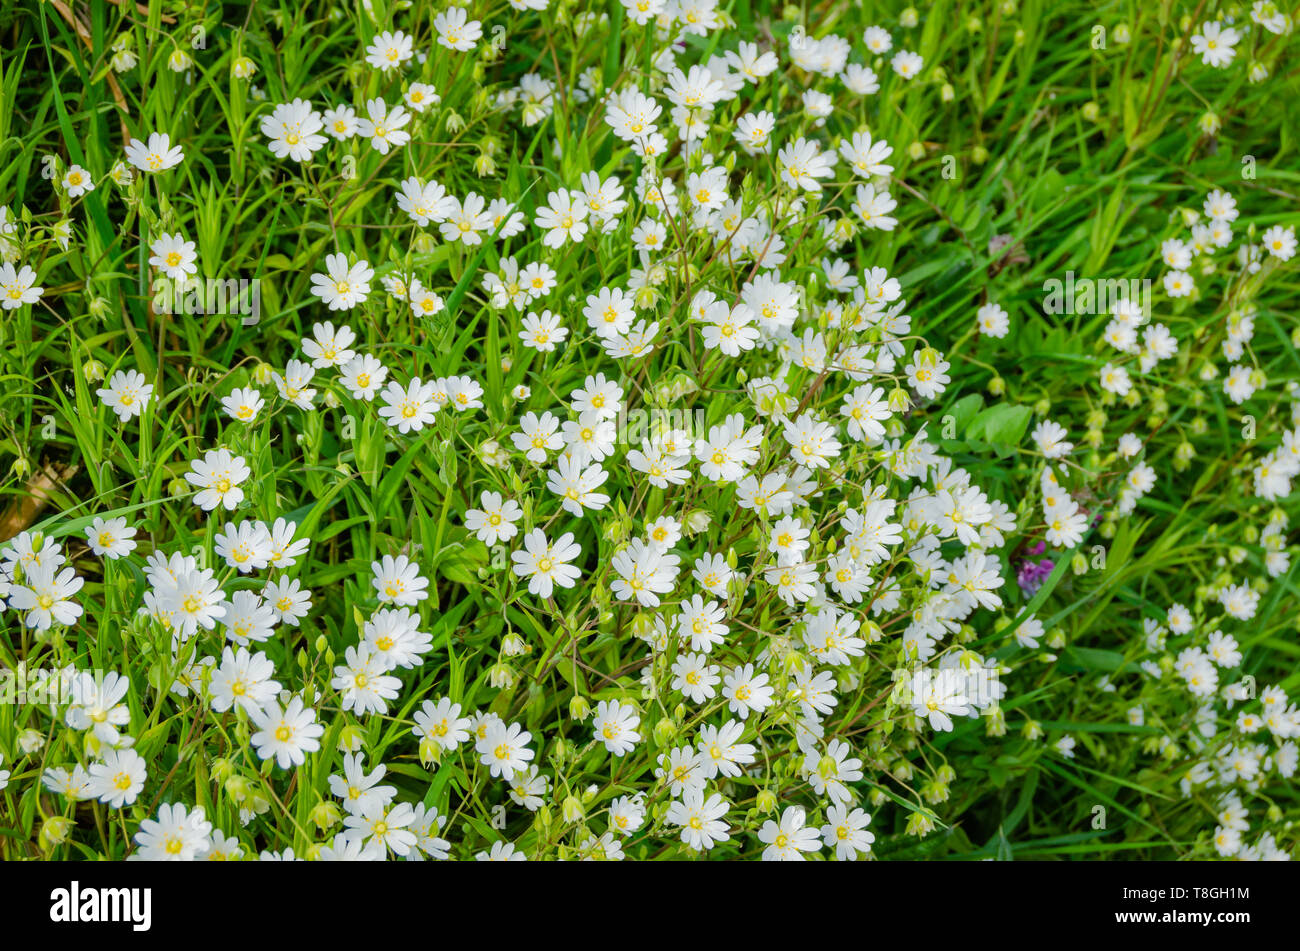 Small wild flowers with white petals and yellow stamen on green stems and leaves. Stock Photo